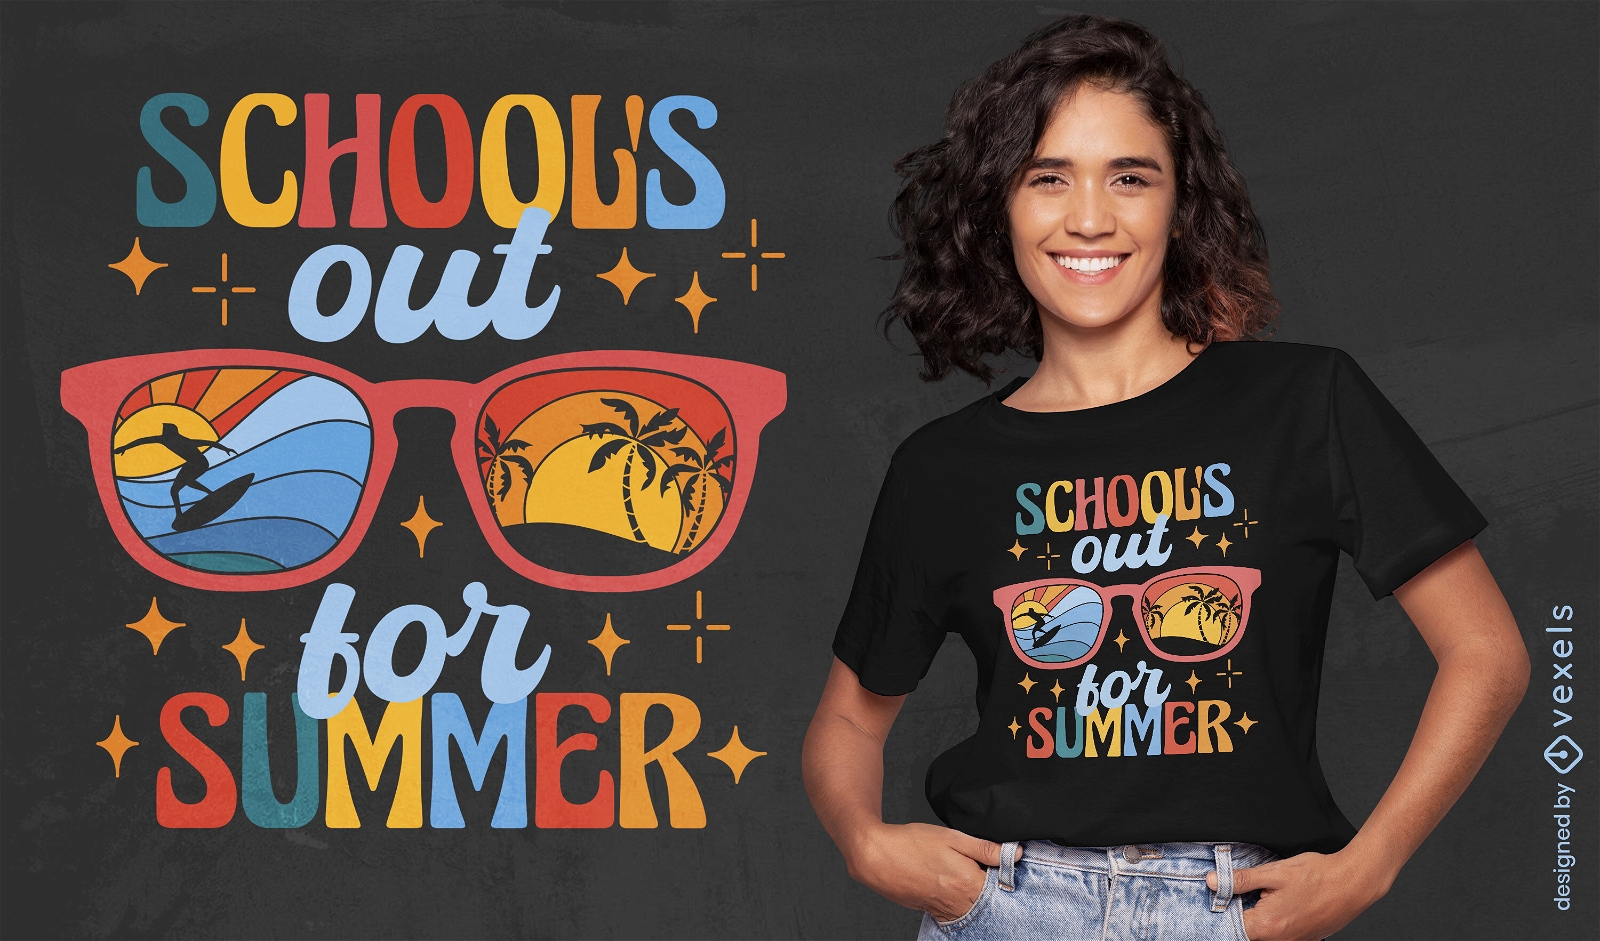 Schools out for summer t-shirt design